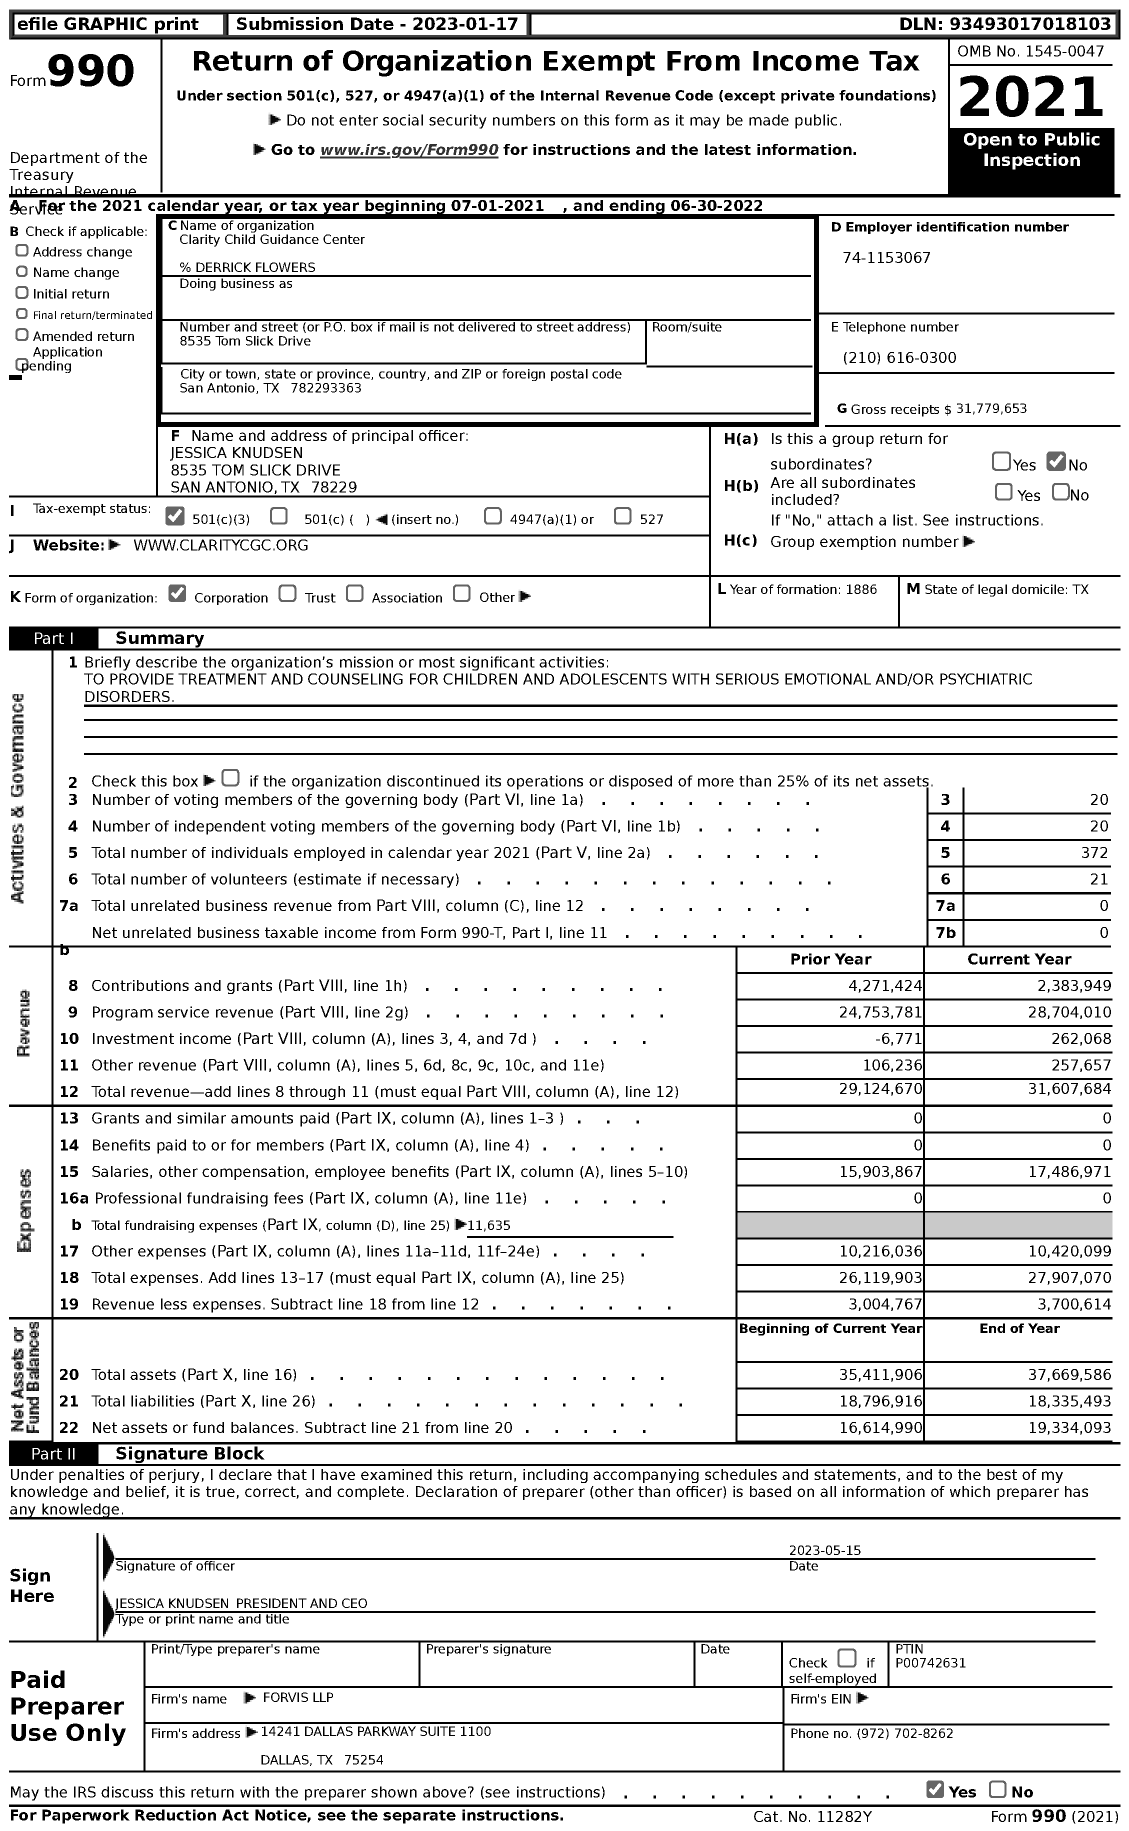 Image of first page of 2021 Form 990 for Clarity Child Guidance Center